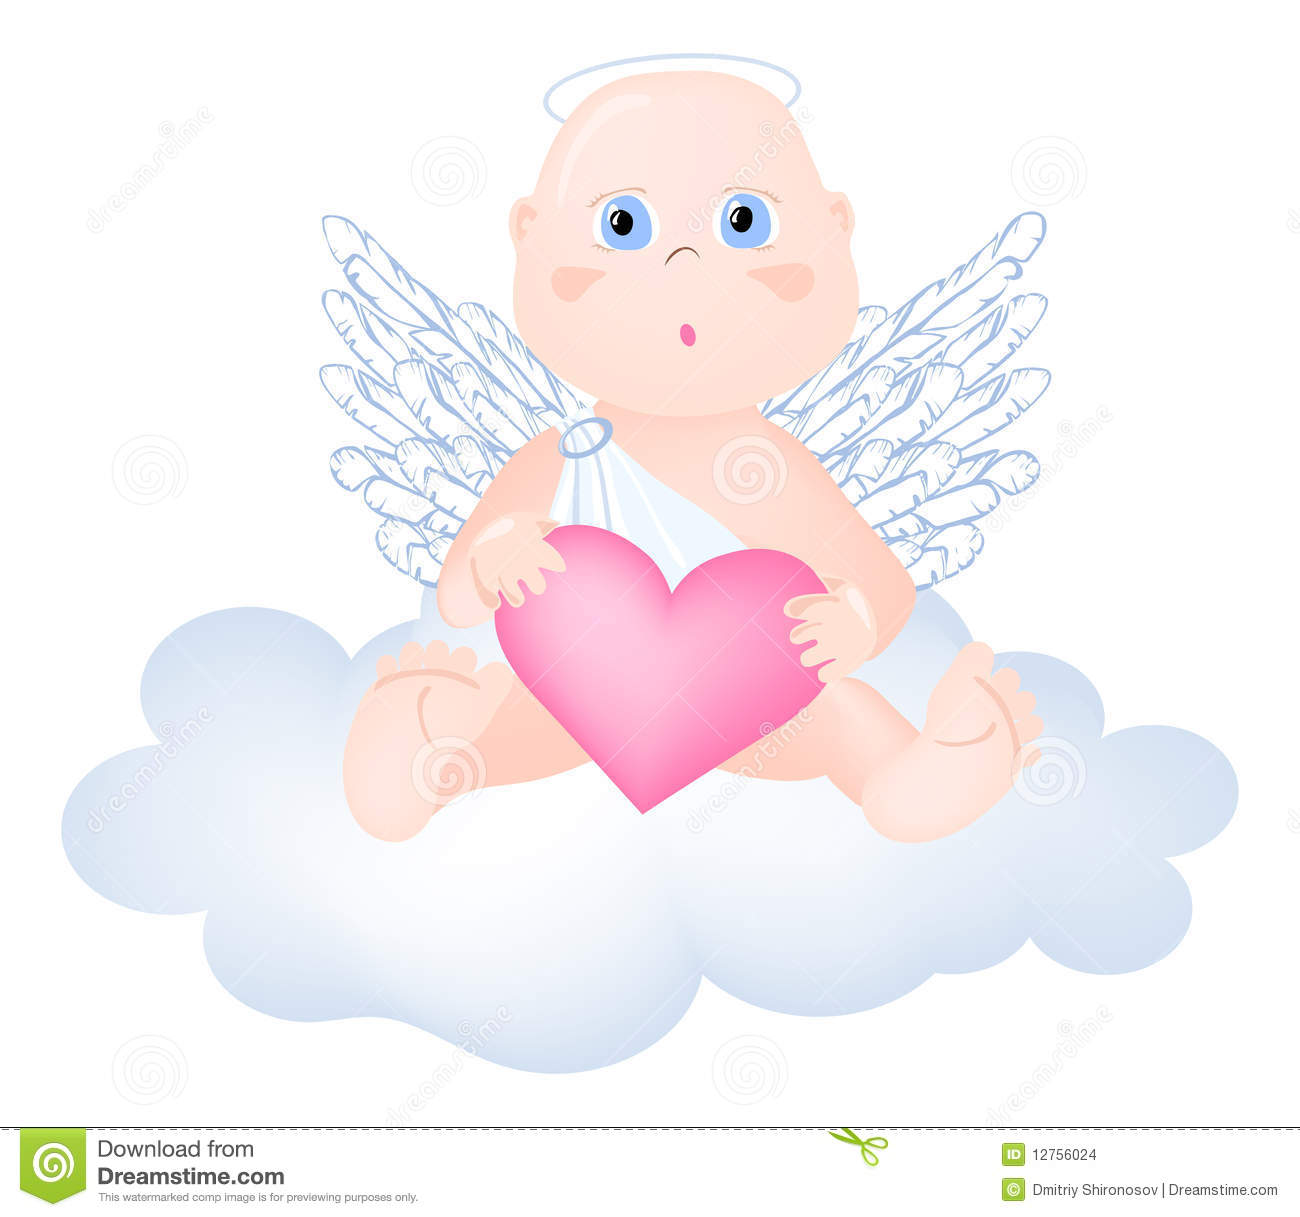 Vector Illustration Of Adorable Angel Sitting On The Cloud